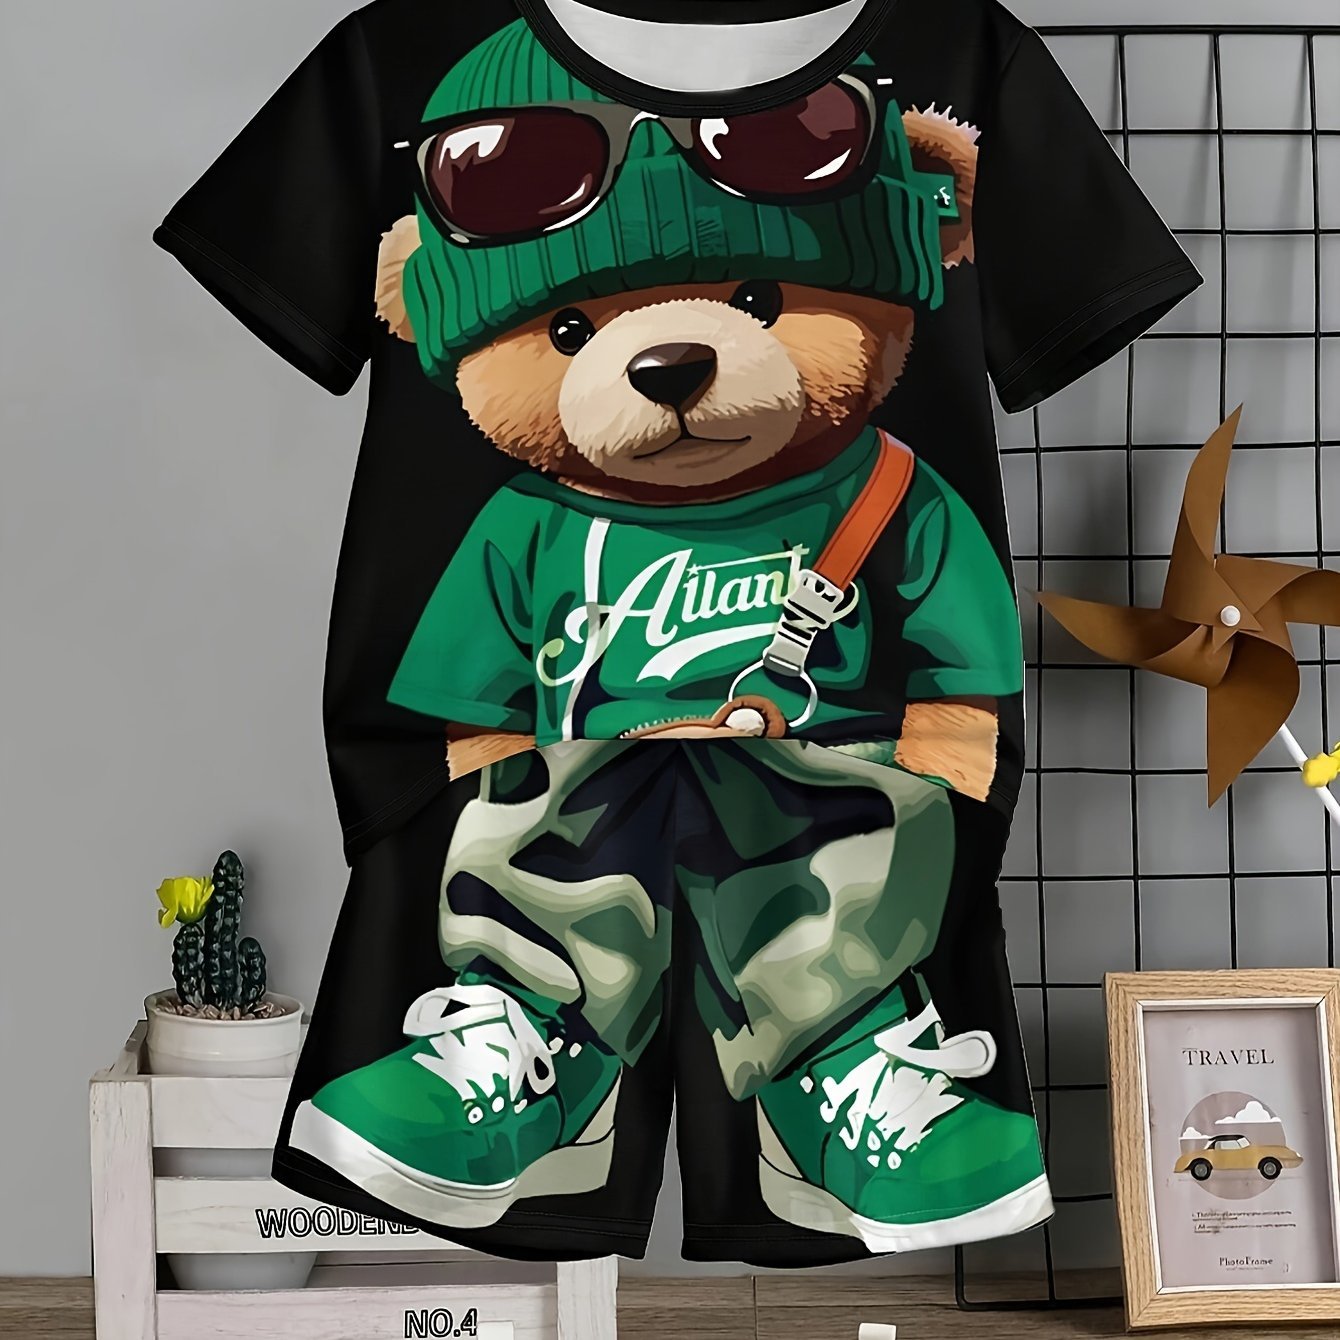 2pcs Boys Fun Cartoon Bear Print Short Sleeve T - shirt & Shorts Set - Ultra - Comfortable, Vibrant, and Versatile Summer Outfit for Active Boys - Complete 2 - Piece Set for a Stylish and Coordinated Look - Ammpoure Wellbeing